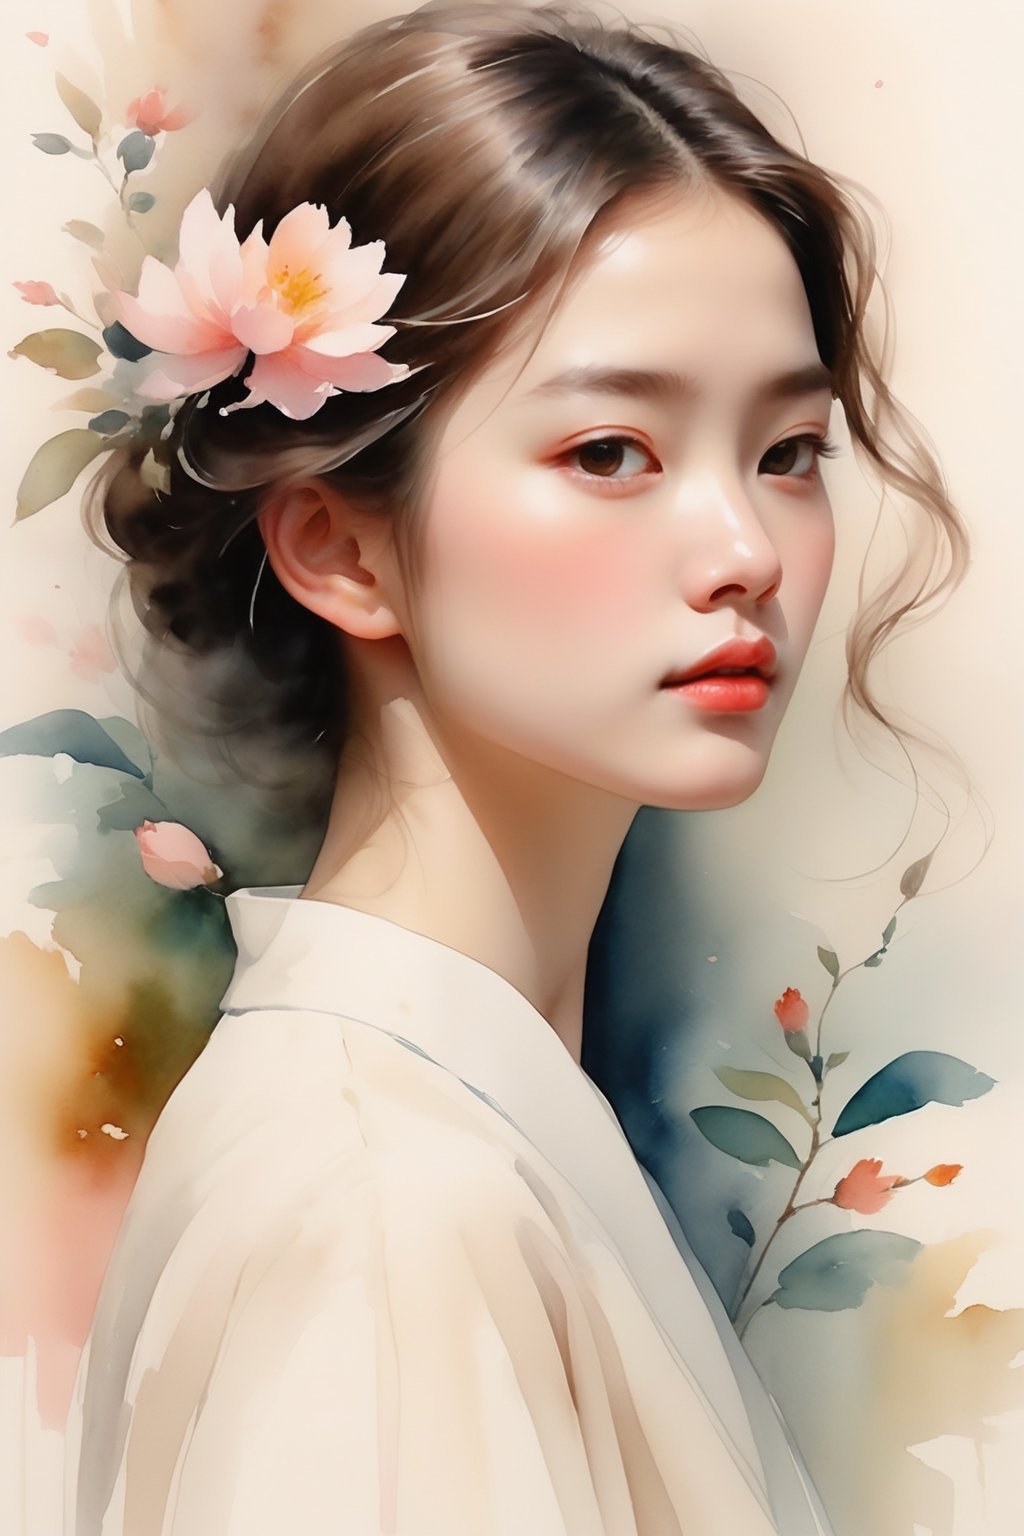 Generate a female portrait illustration inspired by the watercolor artworks of Ping Fan and Chen Shufen, renowned for their delicate portrayal of women. Emulate their style by infusing the portrait with soft, ethereal brushstrokes that convey a sense of tranquility and grace. Focus on capturing the subtle nuances of expression, reflecting both inner strength and vulnerability. Incorporate hints of cultural symbolism or traditional elements that resonate with the viewer, adding depth to the narrative of the portrait. Pay special attention to the interplay of light and color, creating a luminous effect that enhances the subject's natural beauty. Let the portrait evoke a sense of timeless elegance and understated sophistication, reminiscent of the masterpieces by Ping Fan and Chen Shufen.,watercolor \(medium\),watercolor